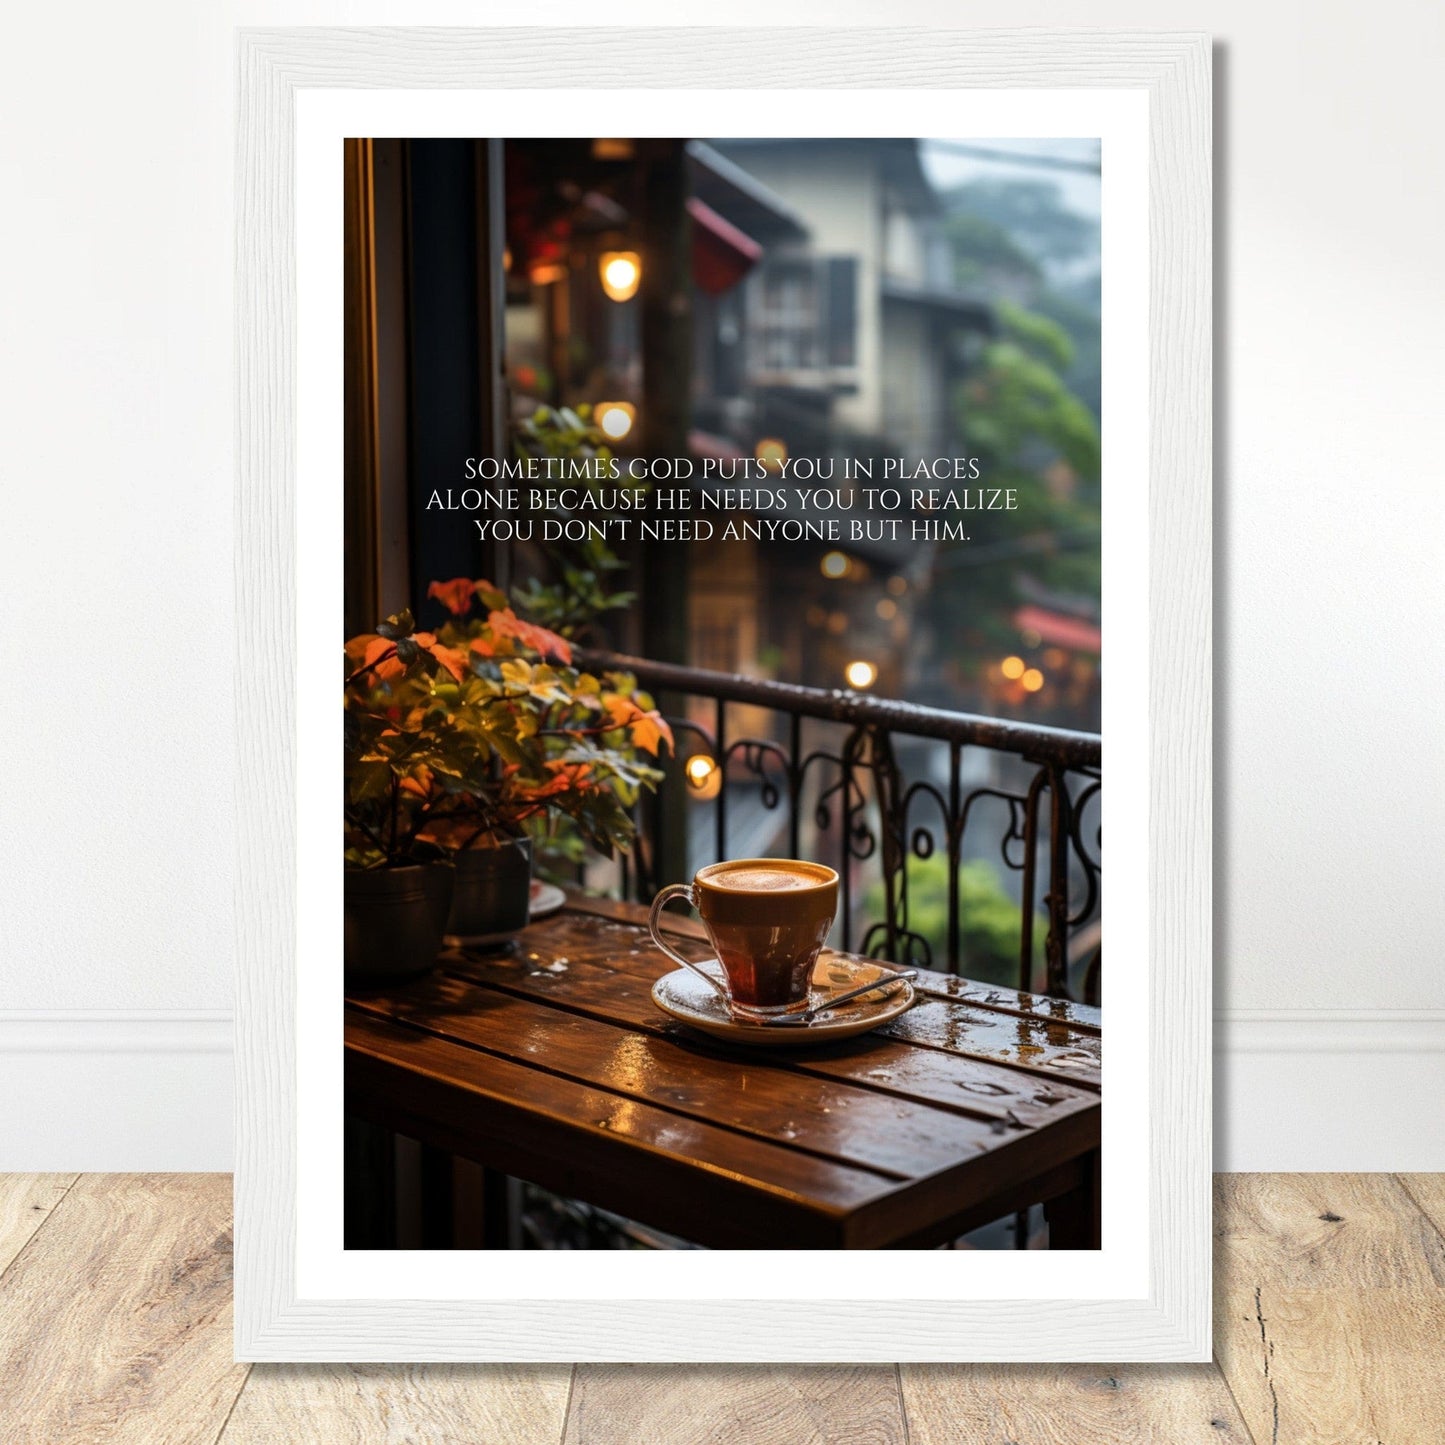 Coffee With My Father Print Material A4 21x29.7 cm / 8x12″ / White frame Premium Matte Paper Wooden Framed Poster